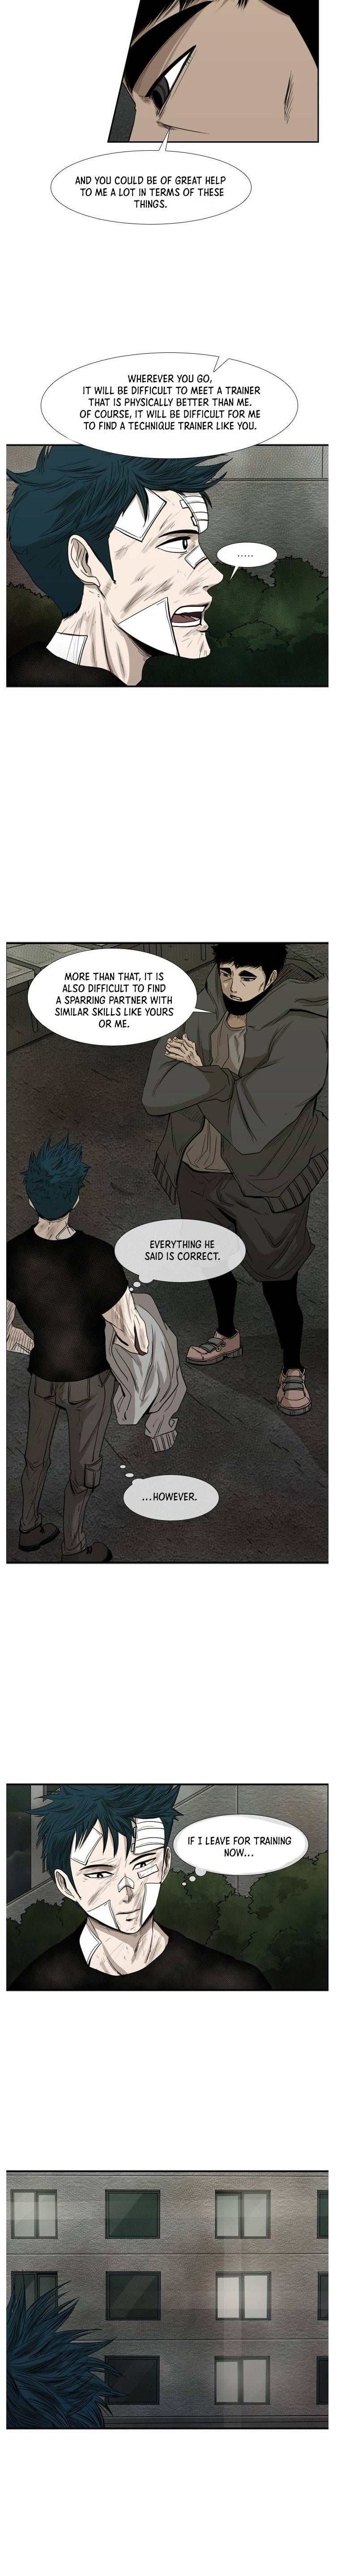 Shark Chapter 90 page 6